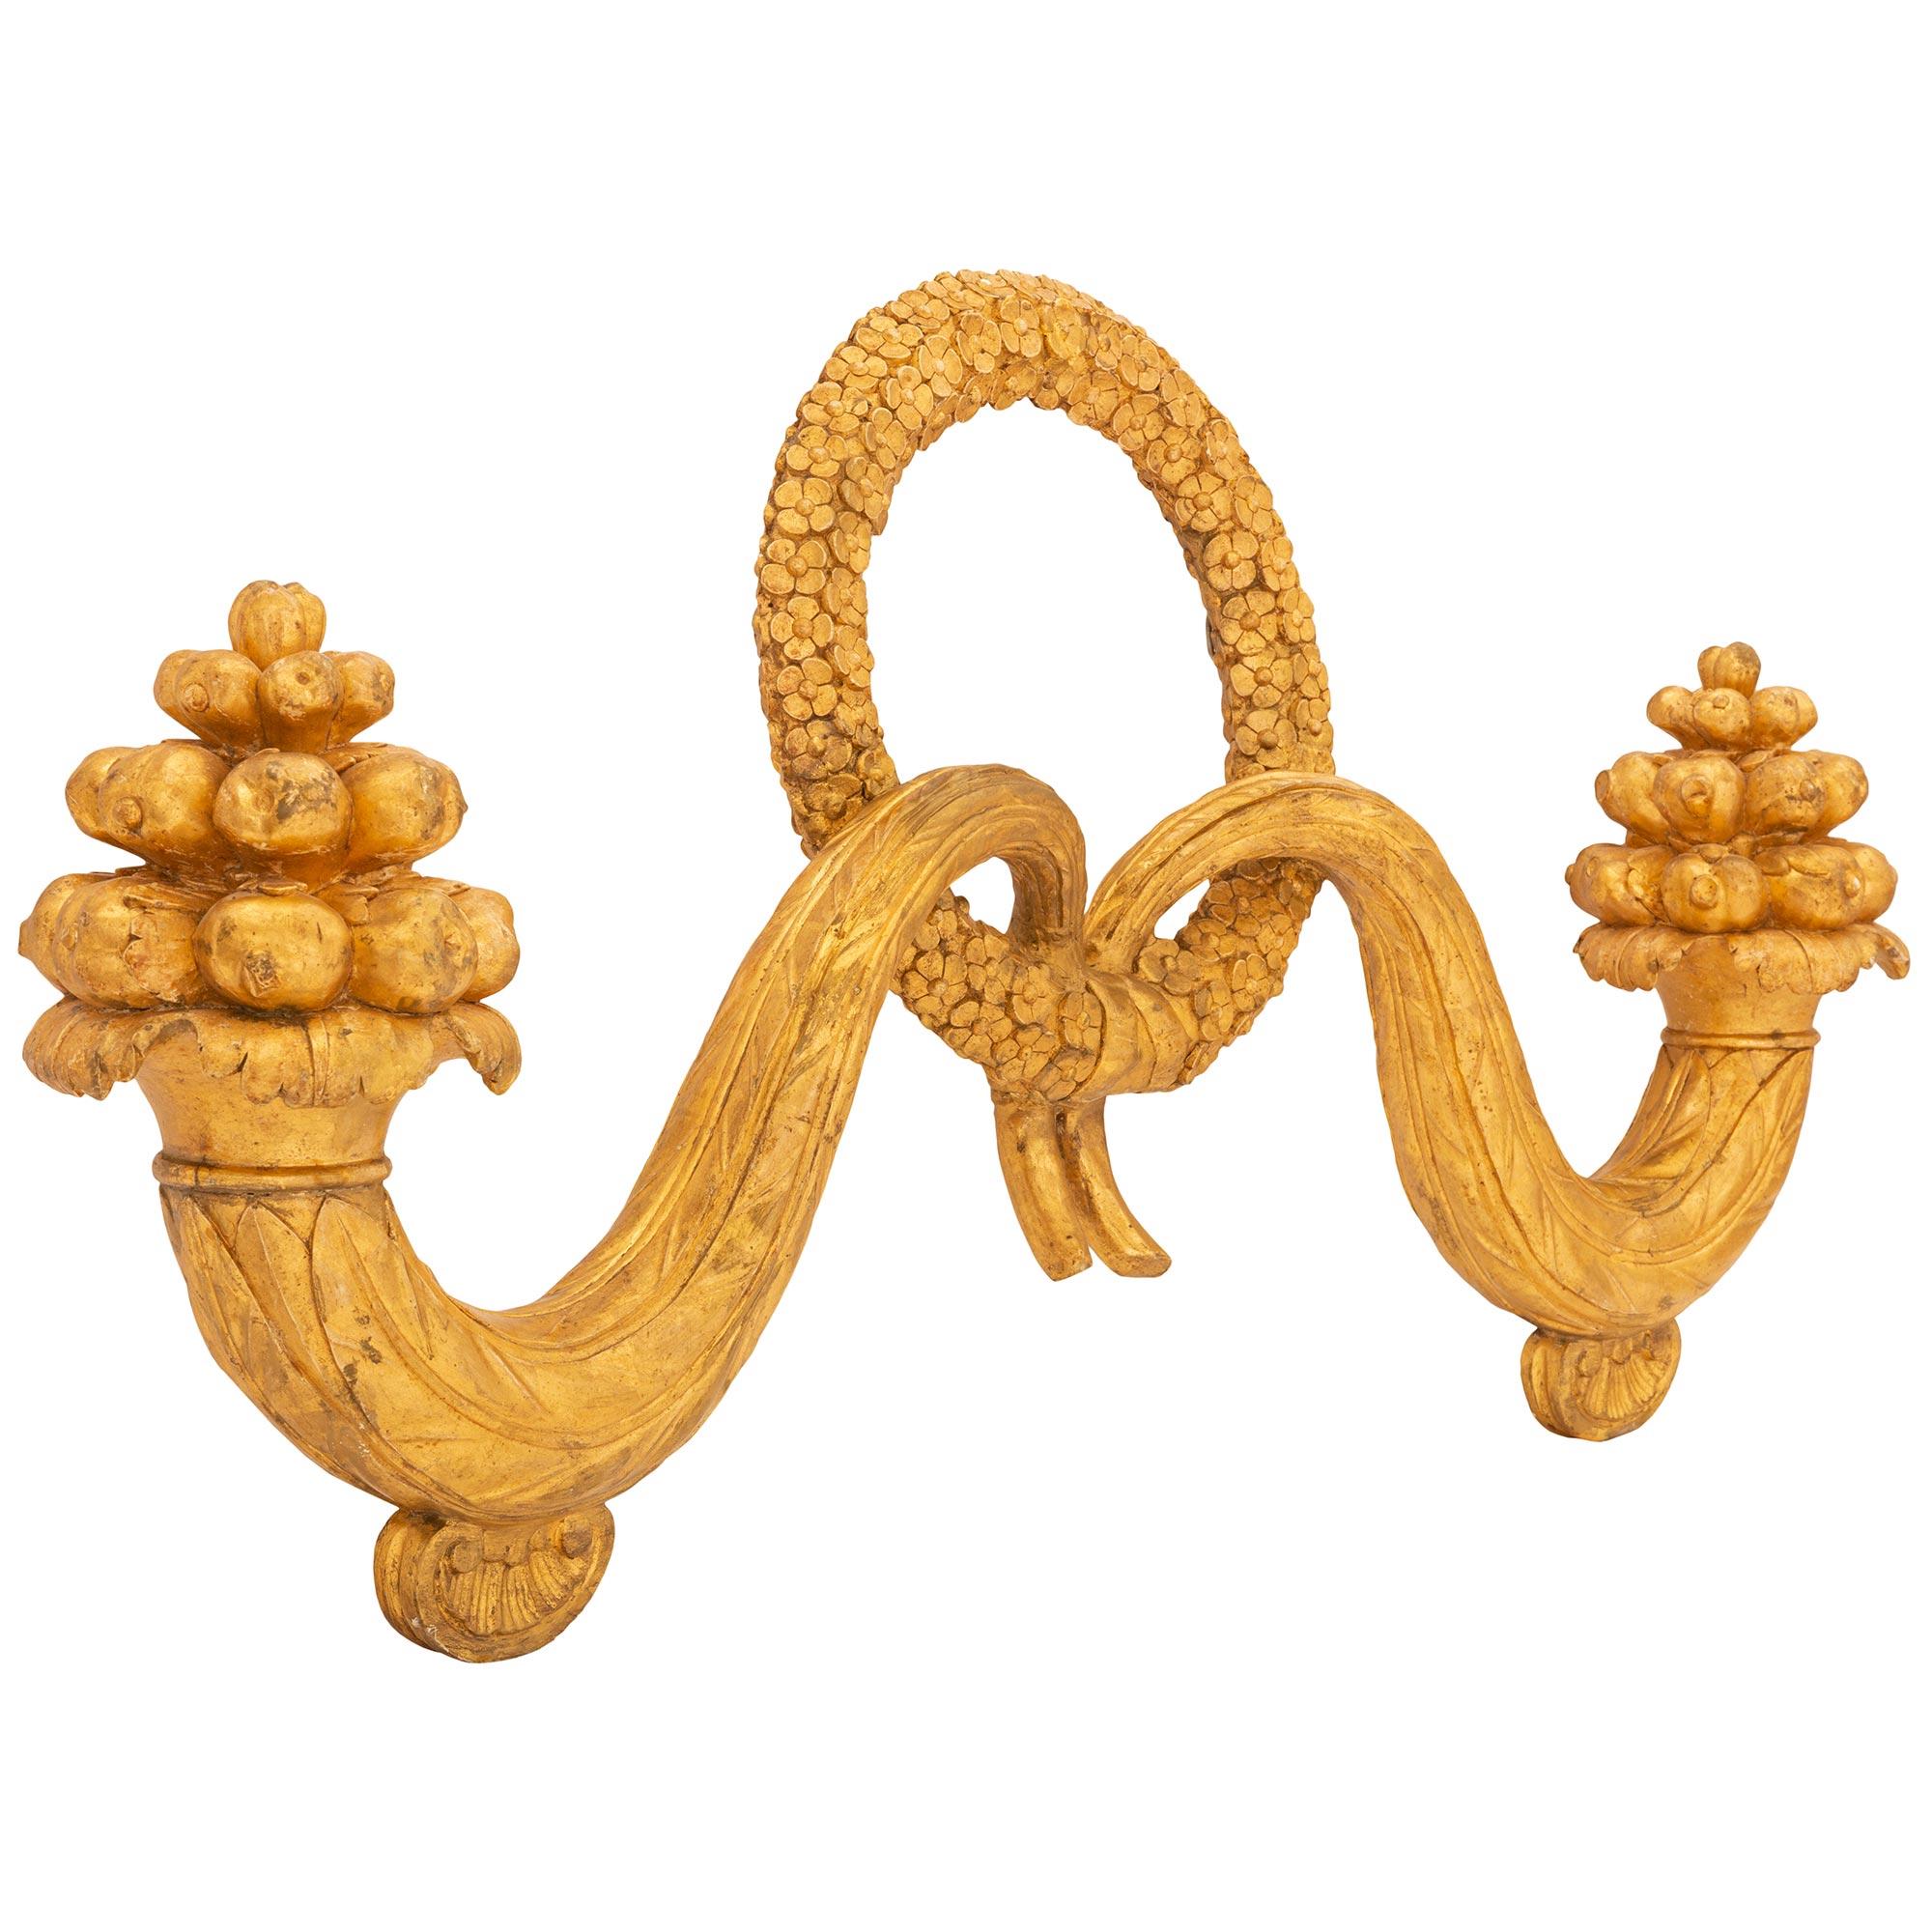 An exceptional and extremely decorative Italian early 19th century Louis XVI st. giltwood decorative wall decor. The wall decor is centered by a beautiful richly carved tied blooming flower wreath. Leading out from the center are two elegantly